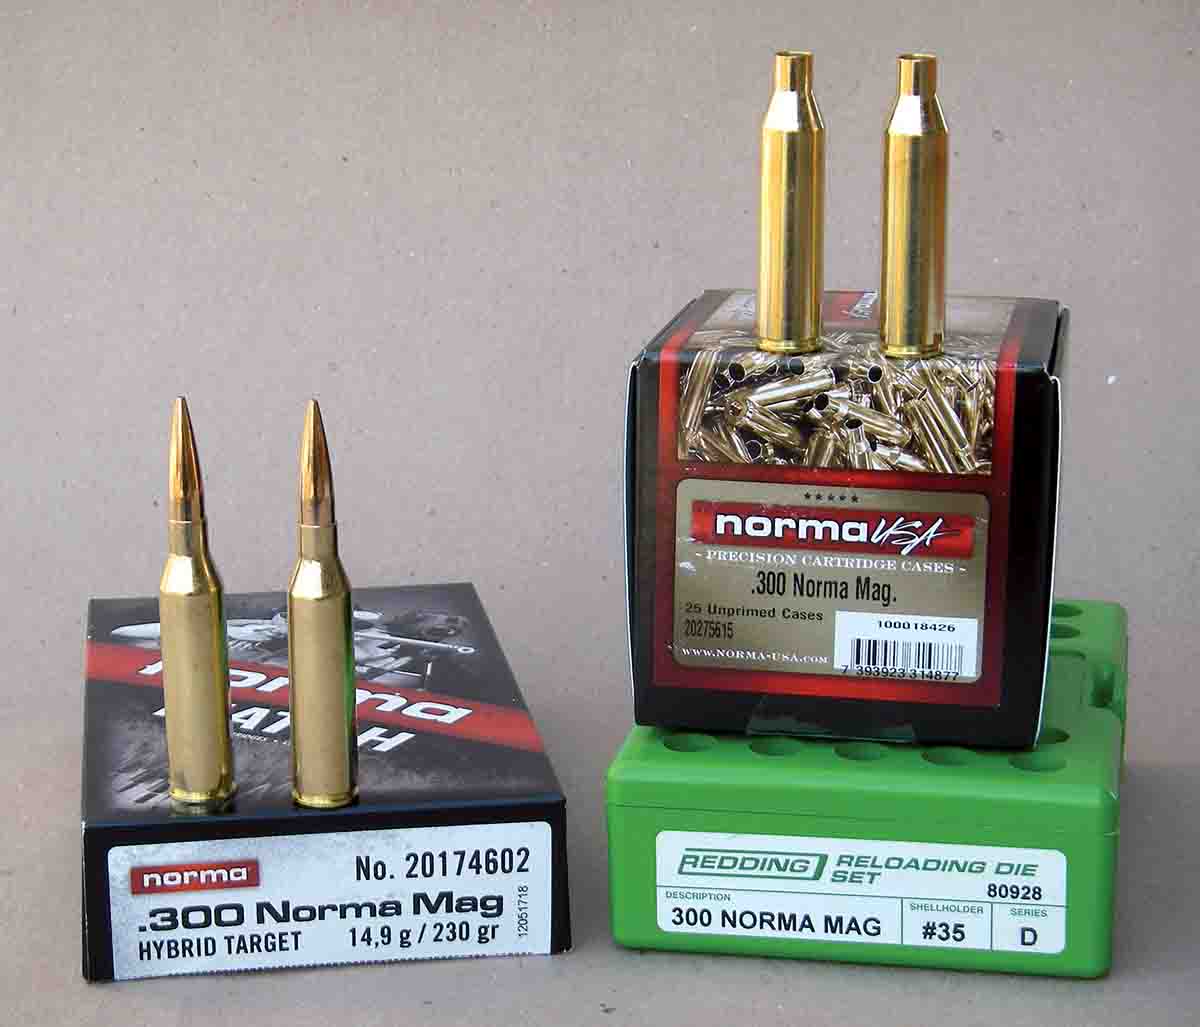 In addition to factory ammunition, Norma offers excellent unprimed cases for handloaders, and Redding offers dies.